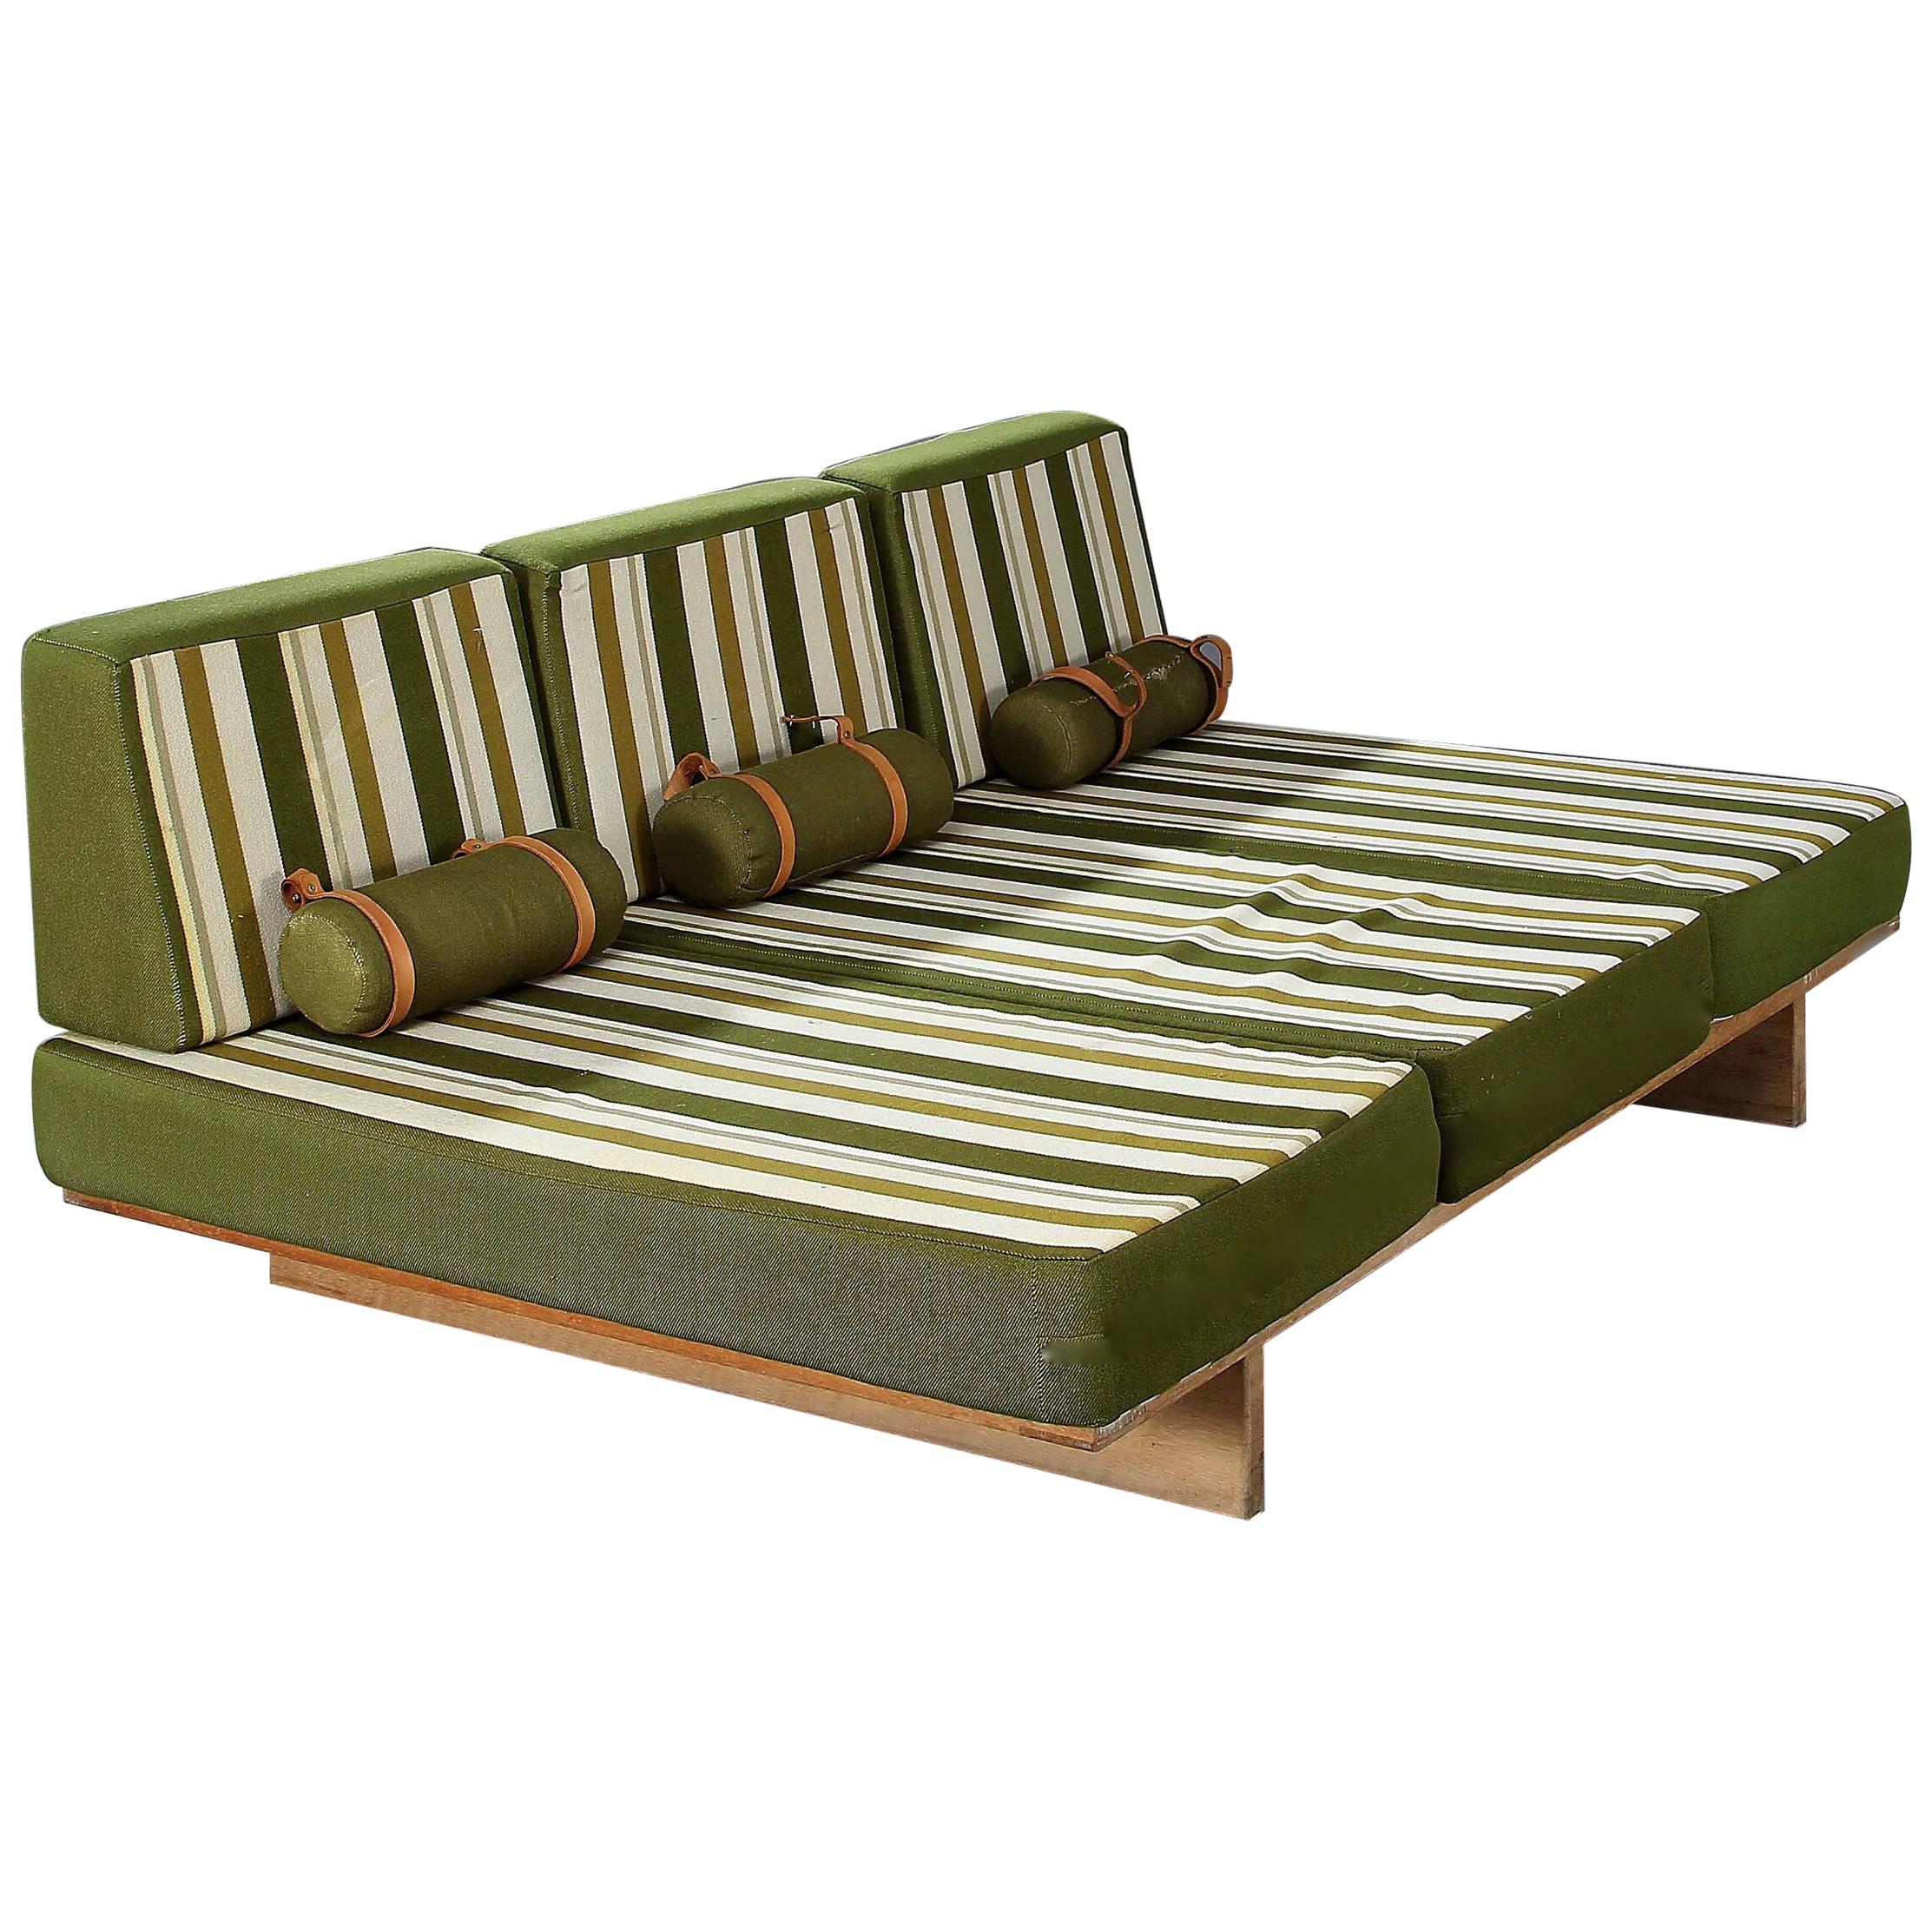 Børge Mogensen Early Erhard Rasmussen Large Daybed Made in 1958 For Sale